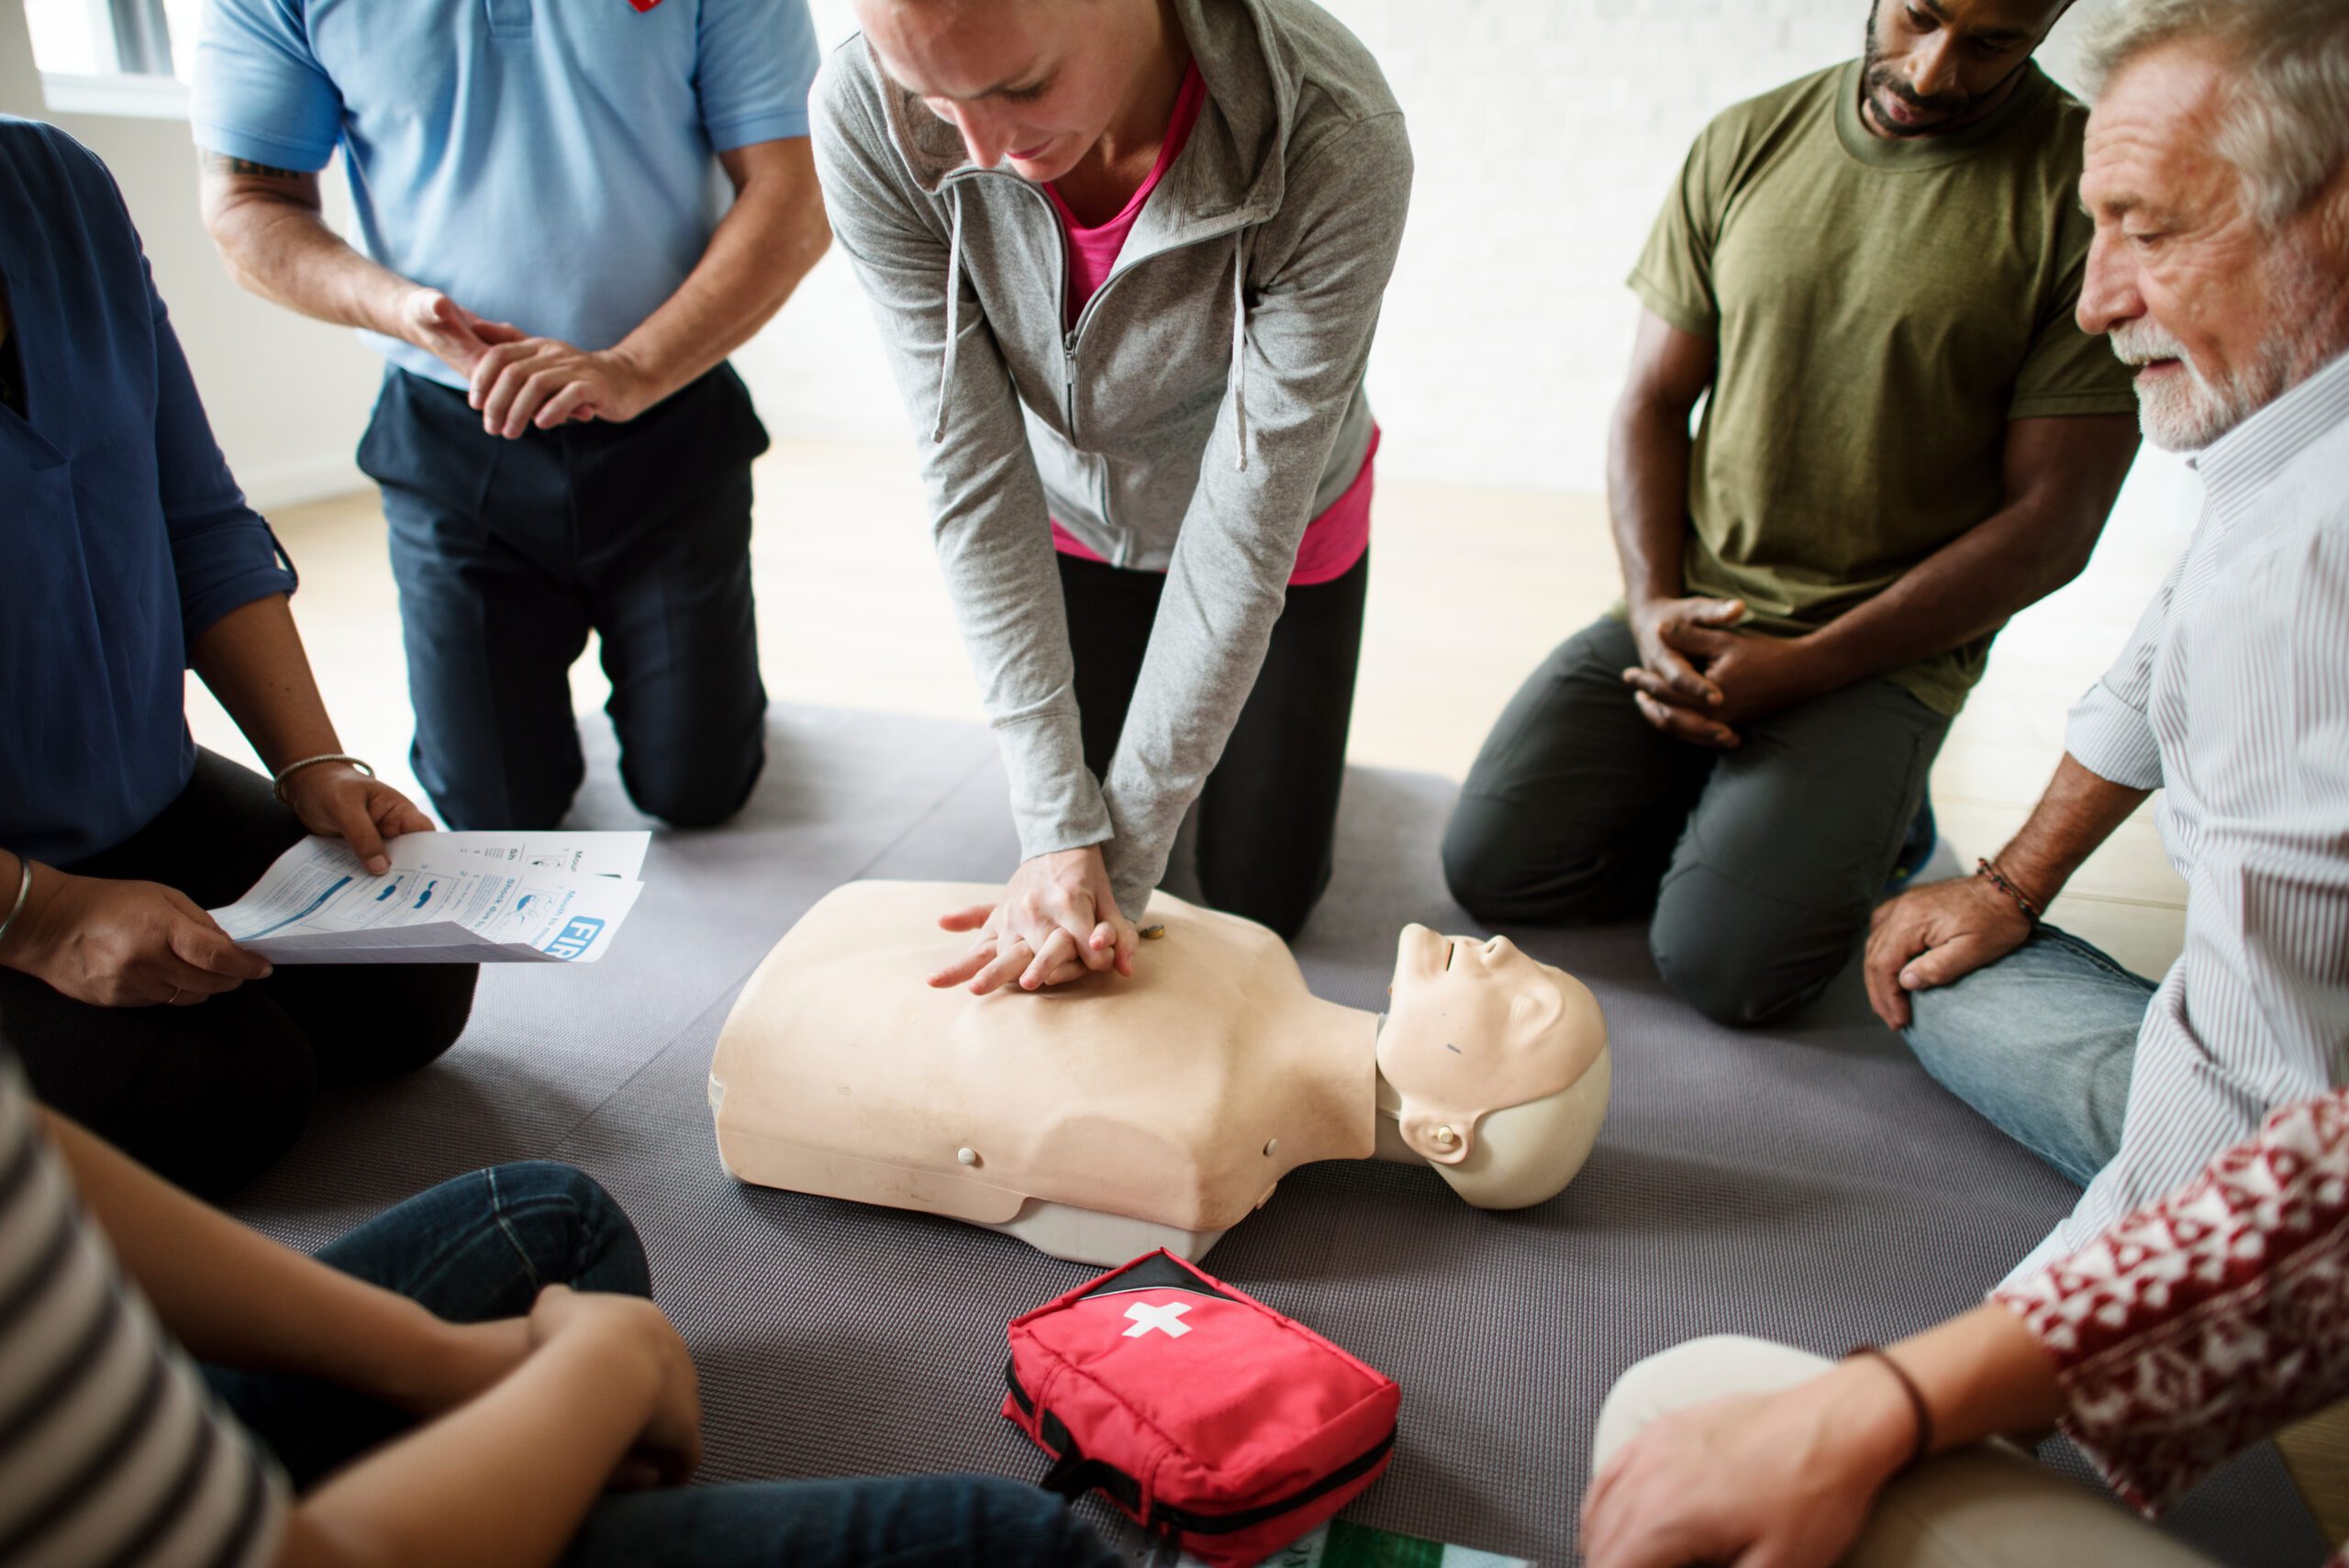 CPR and First Aid training